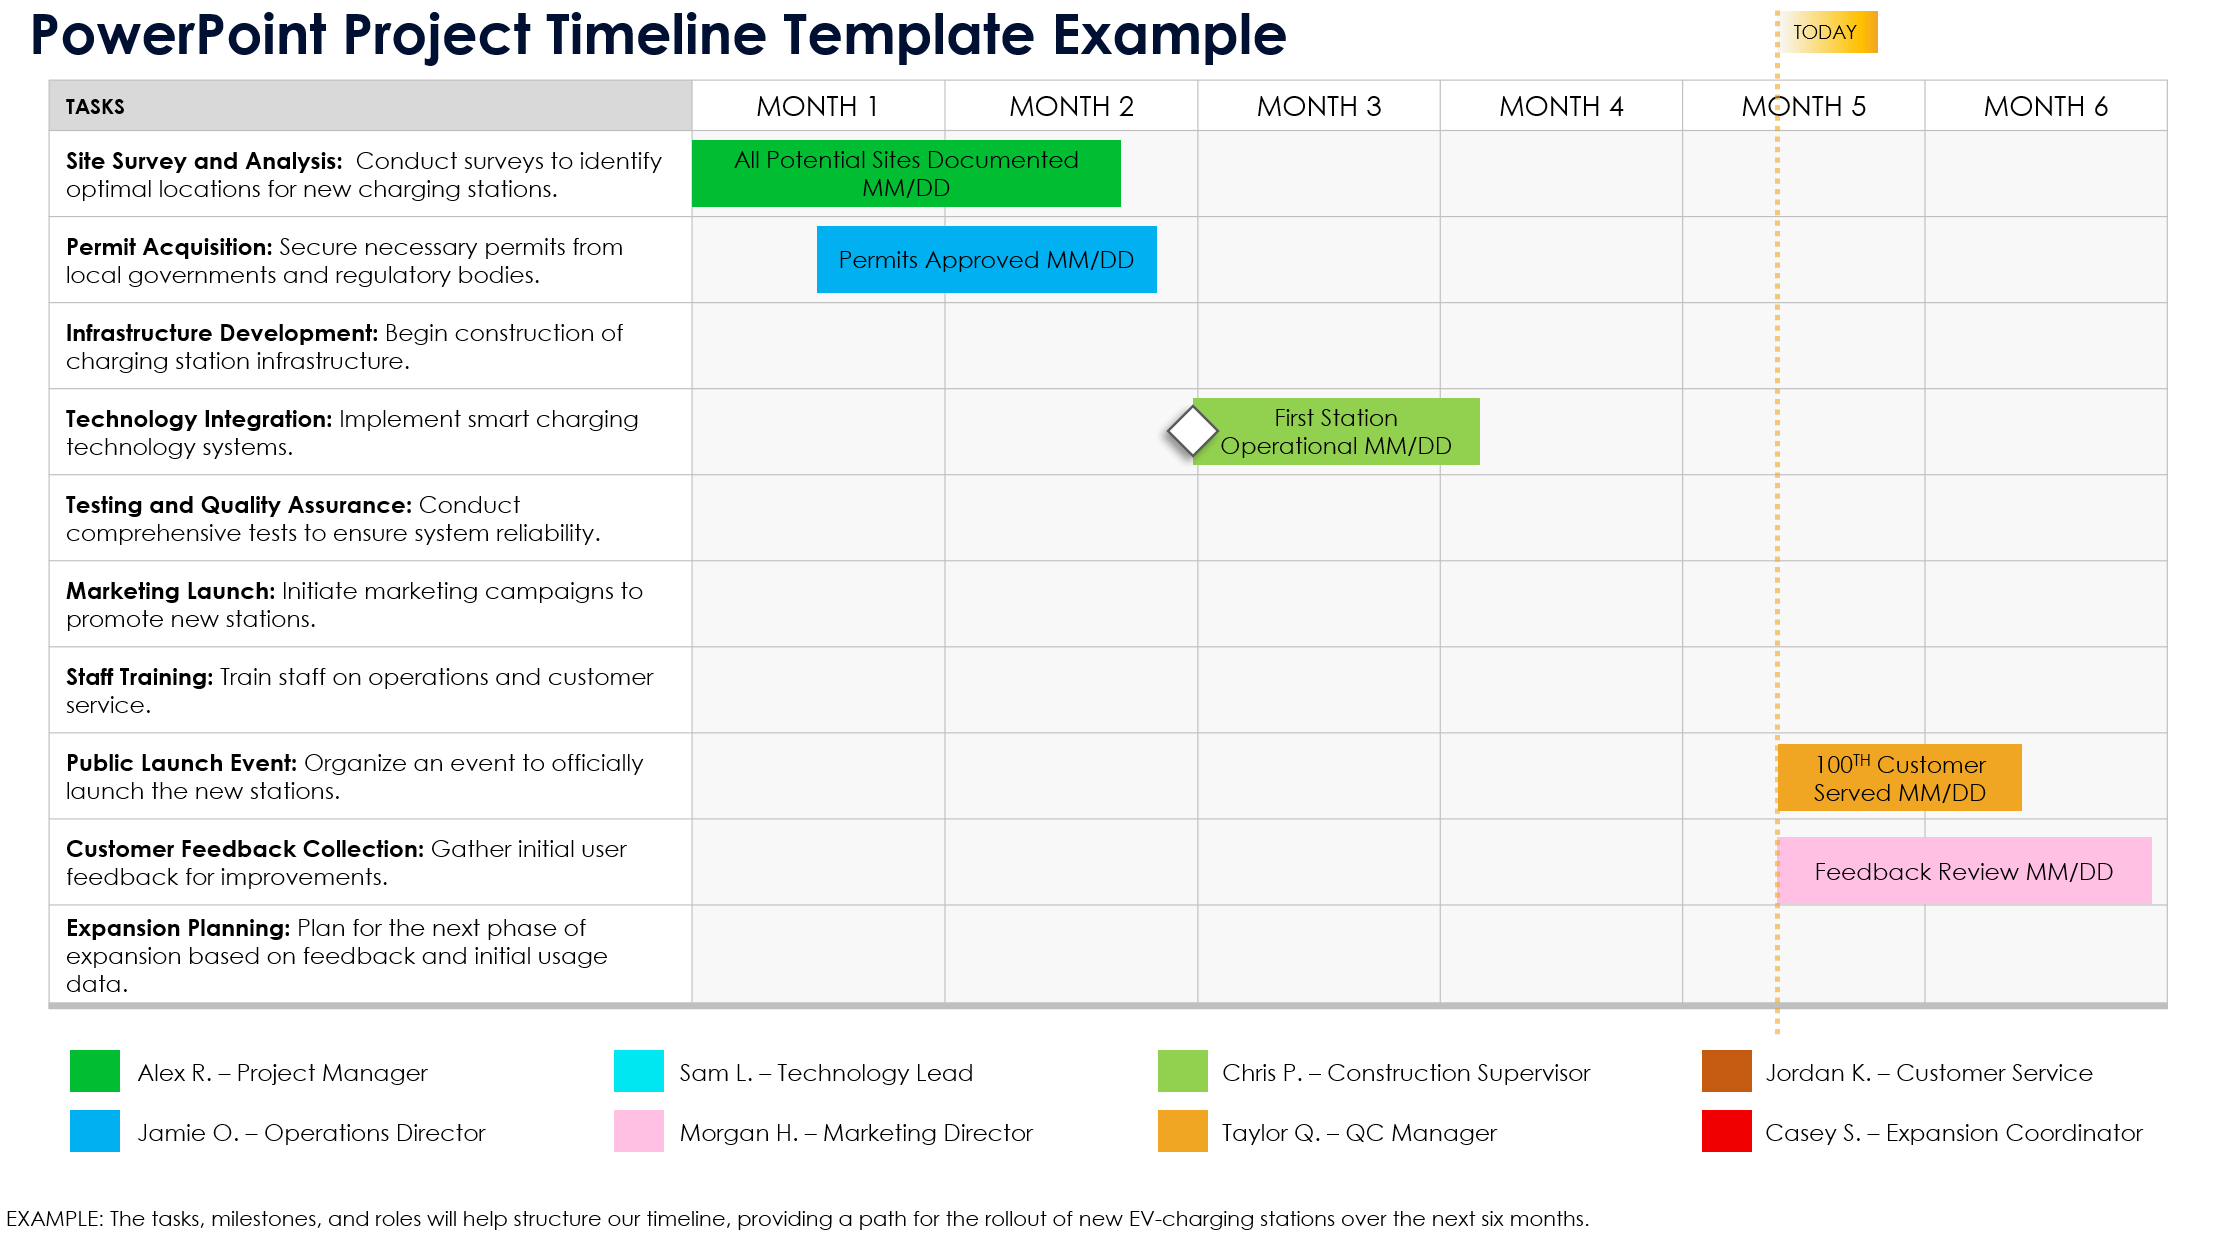 PowerPoint Project Timeline Template Example